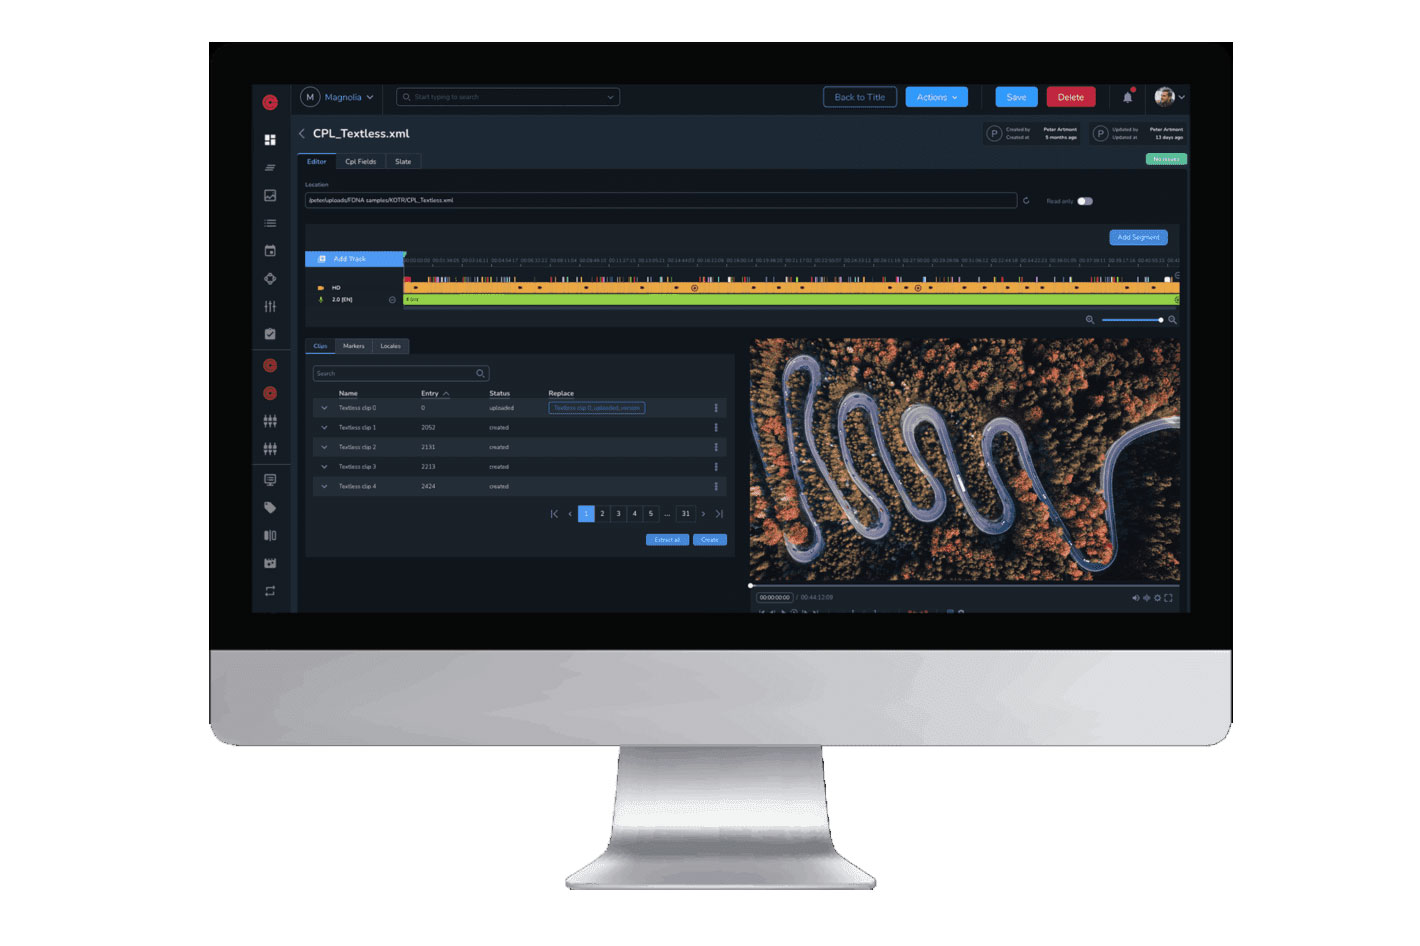 Ateliere Connect wins NAB Show Product Of The Year Award